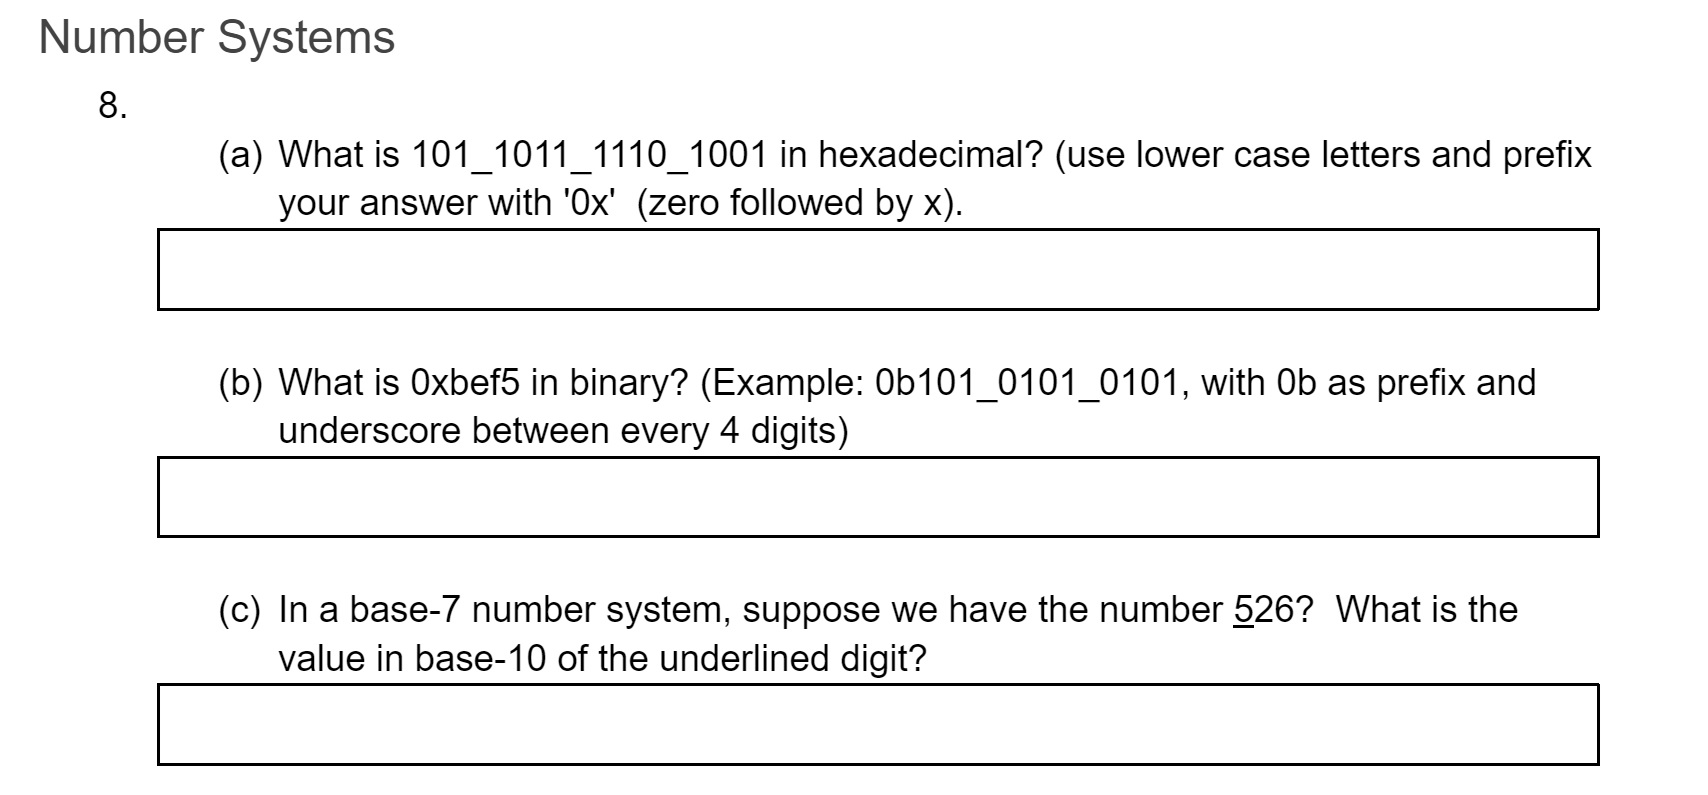 Number Systems 8. (a) What is 101_1011_1110_1001 in hexadecimal? (use lower case letters and prefix your